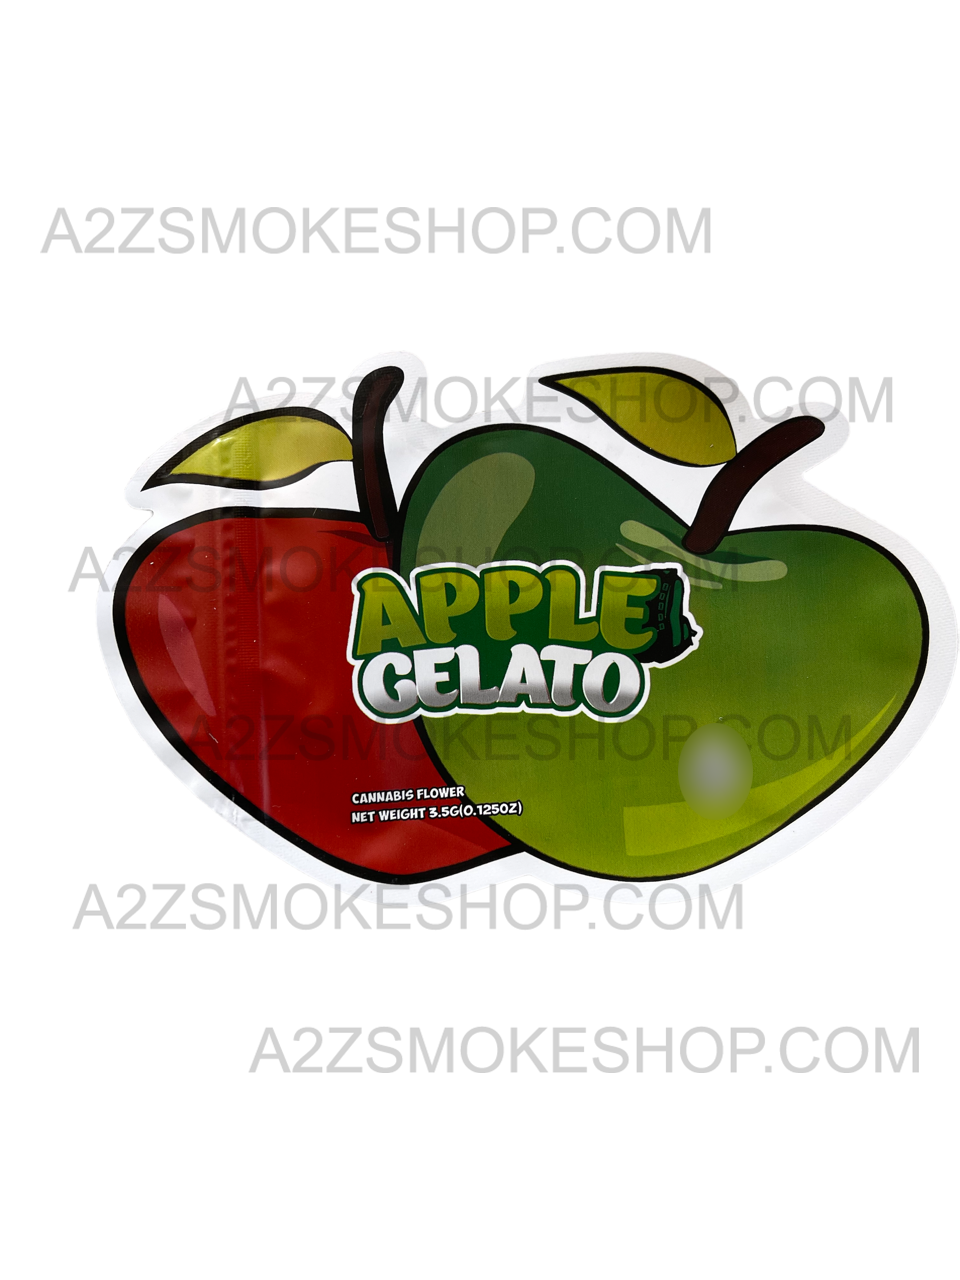 Apple Gelato cut out Mylar bag  3.5g Packaging only